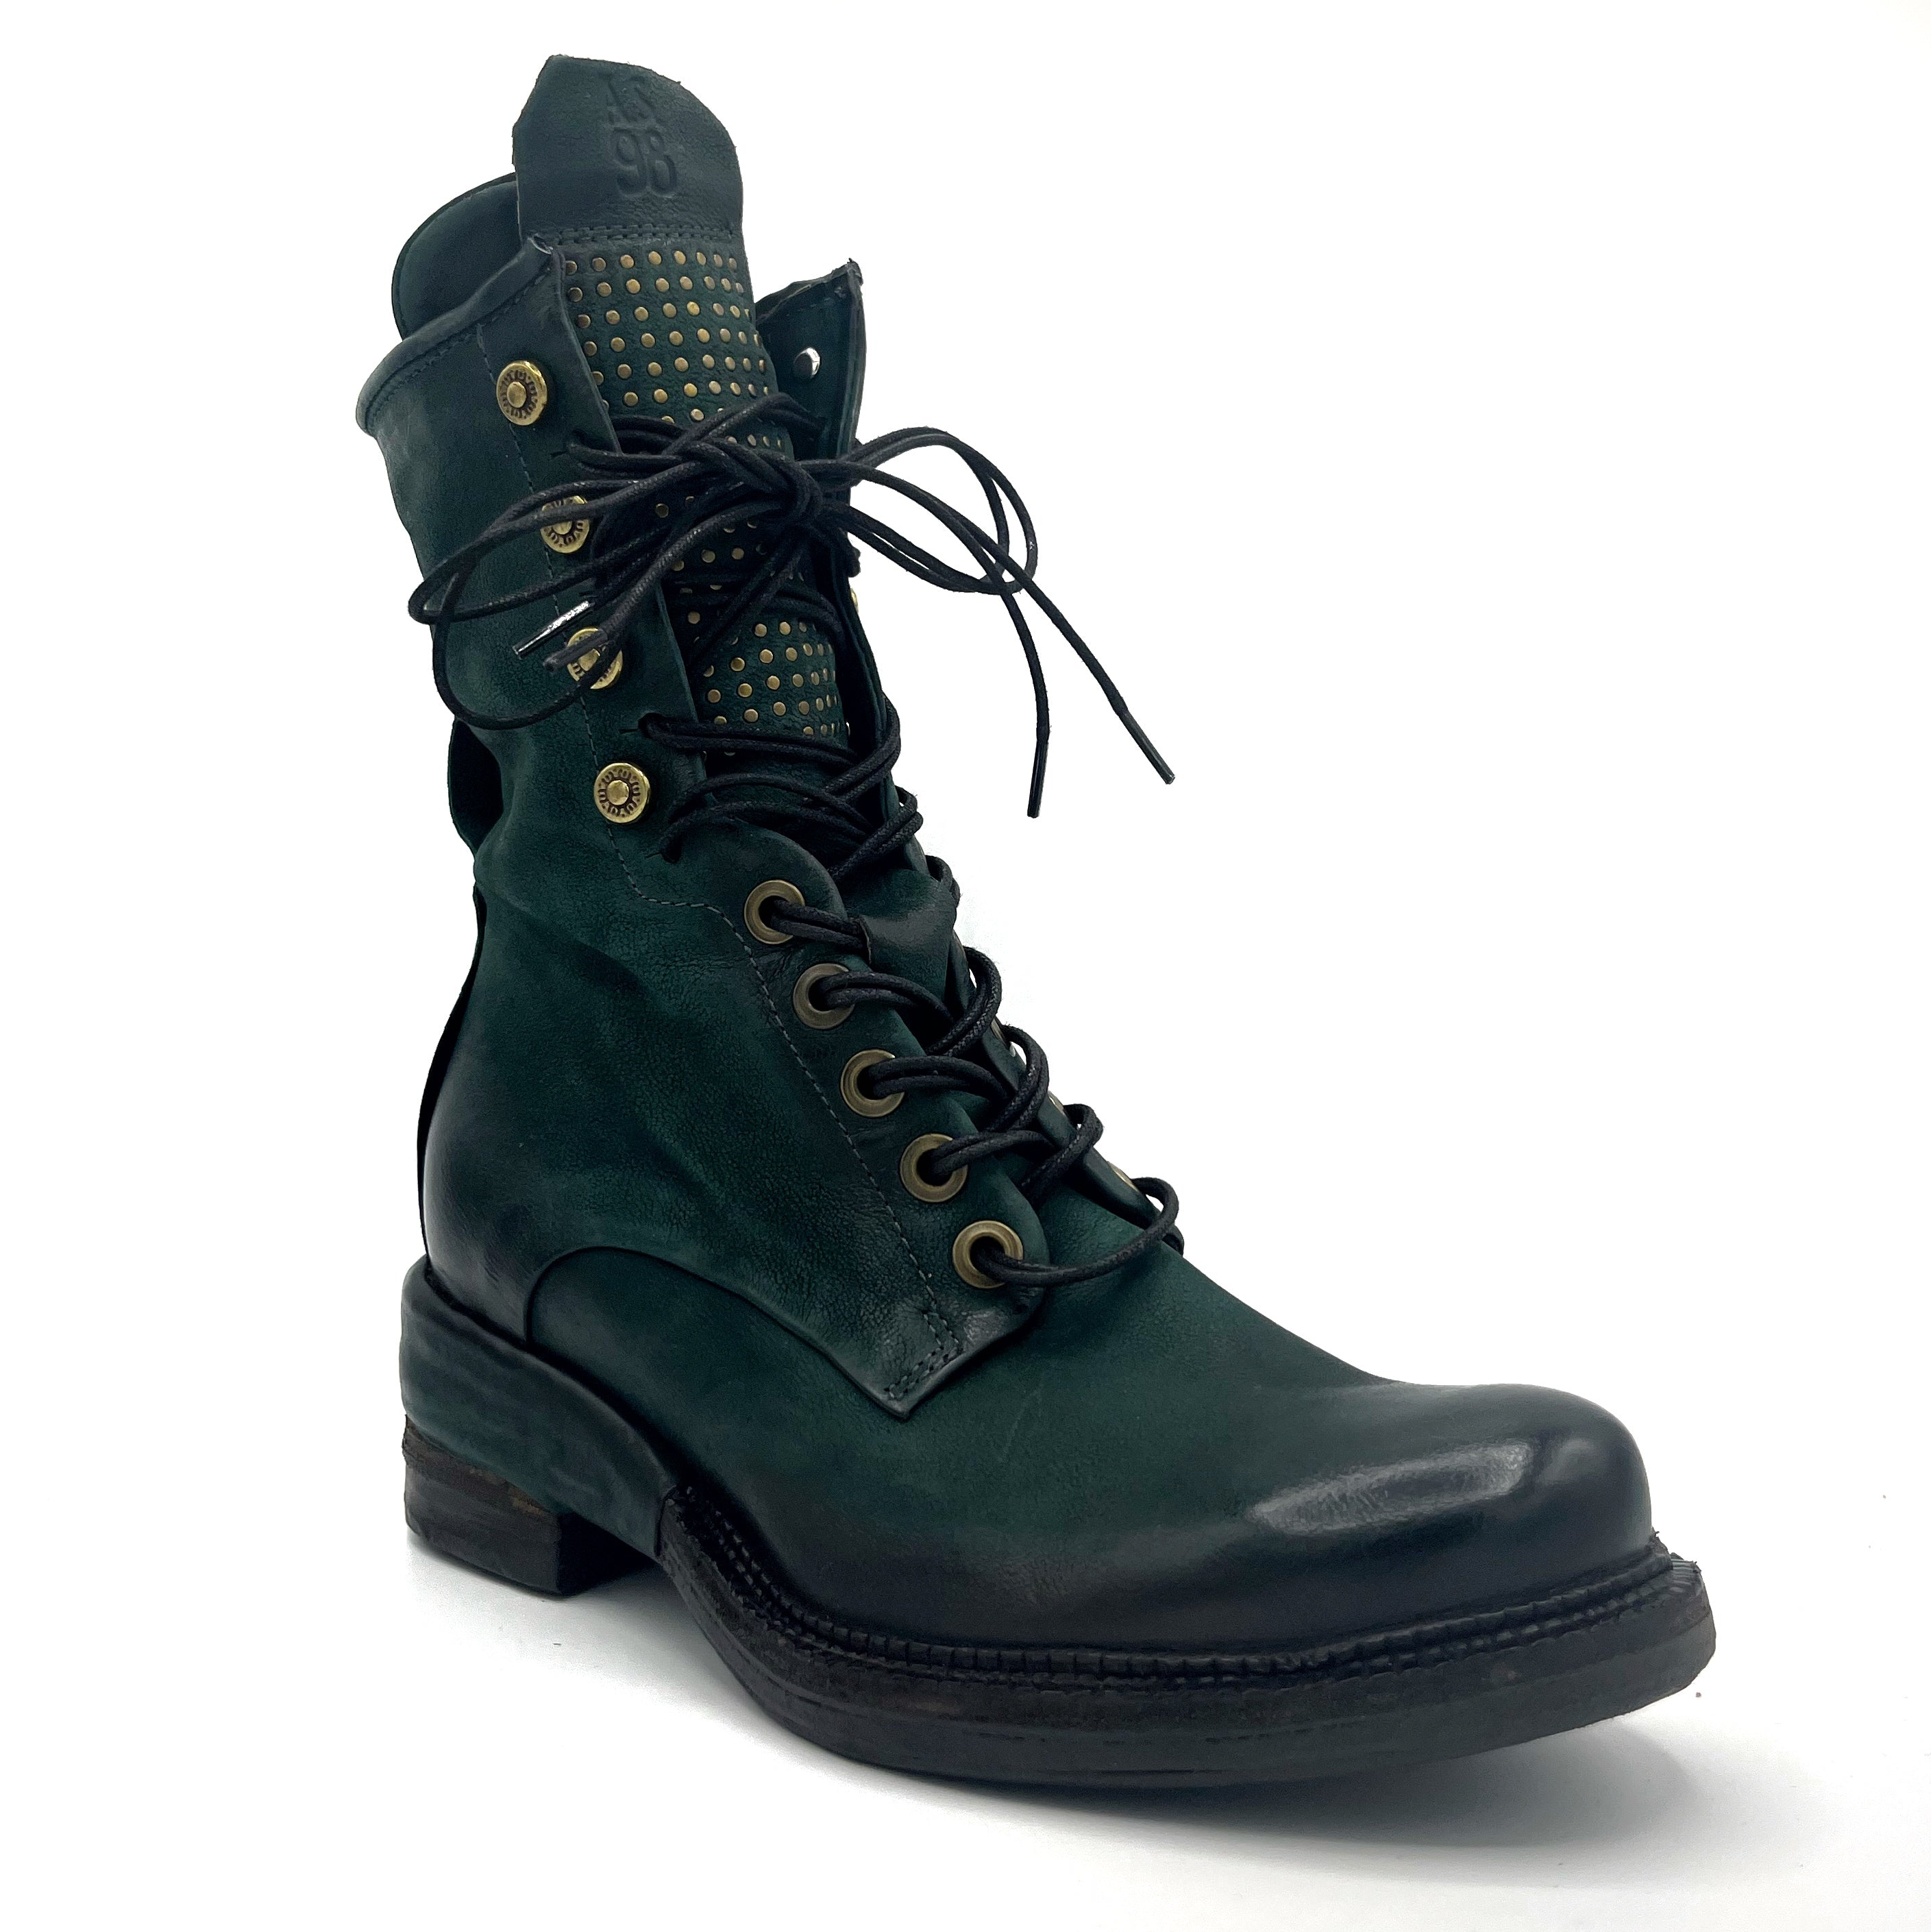 Outer front side view of the A.S.98 Saunder boot in balsamic.